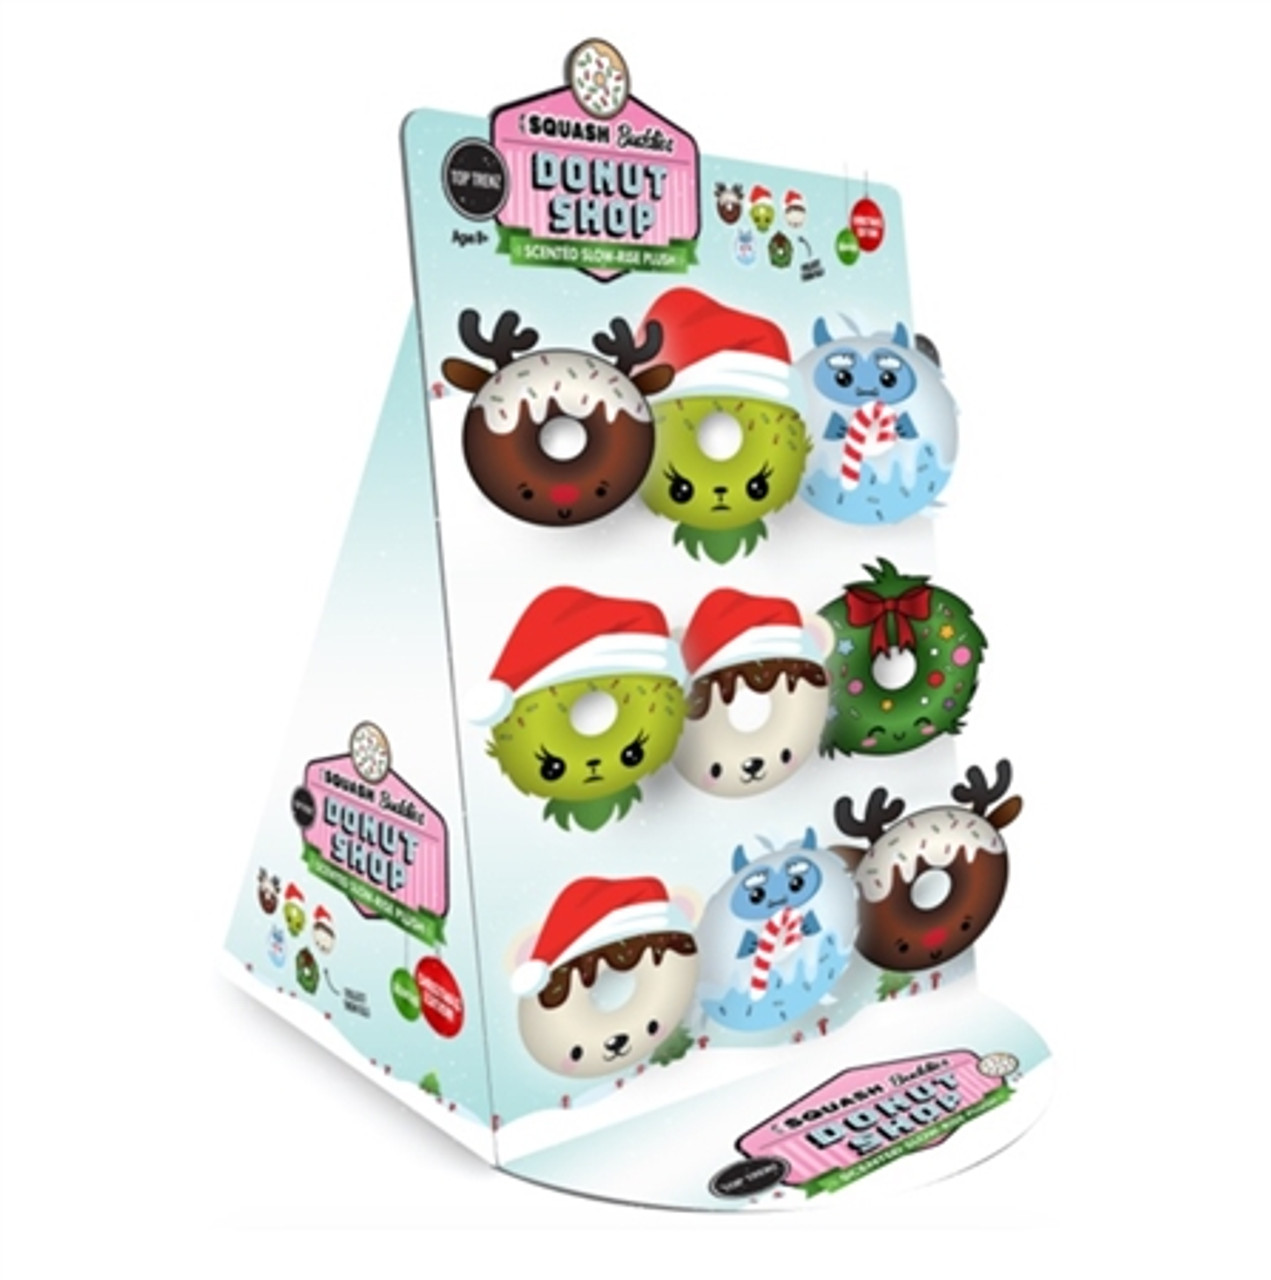 Scented Donut Shop Slow Rise Plush HOLIDAY EDITION is a fun slow rise plush toy.